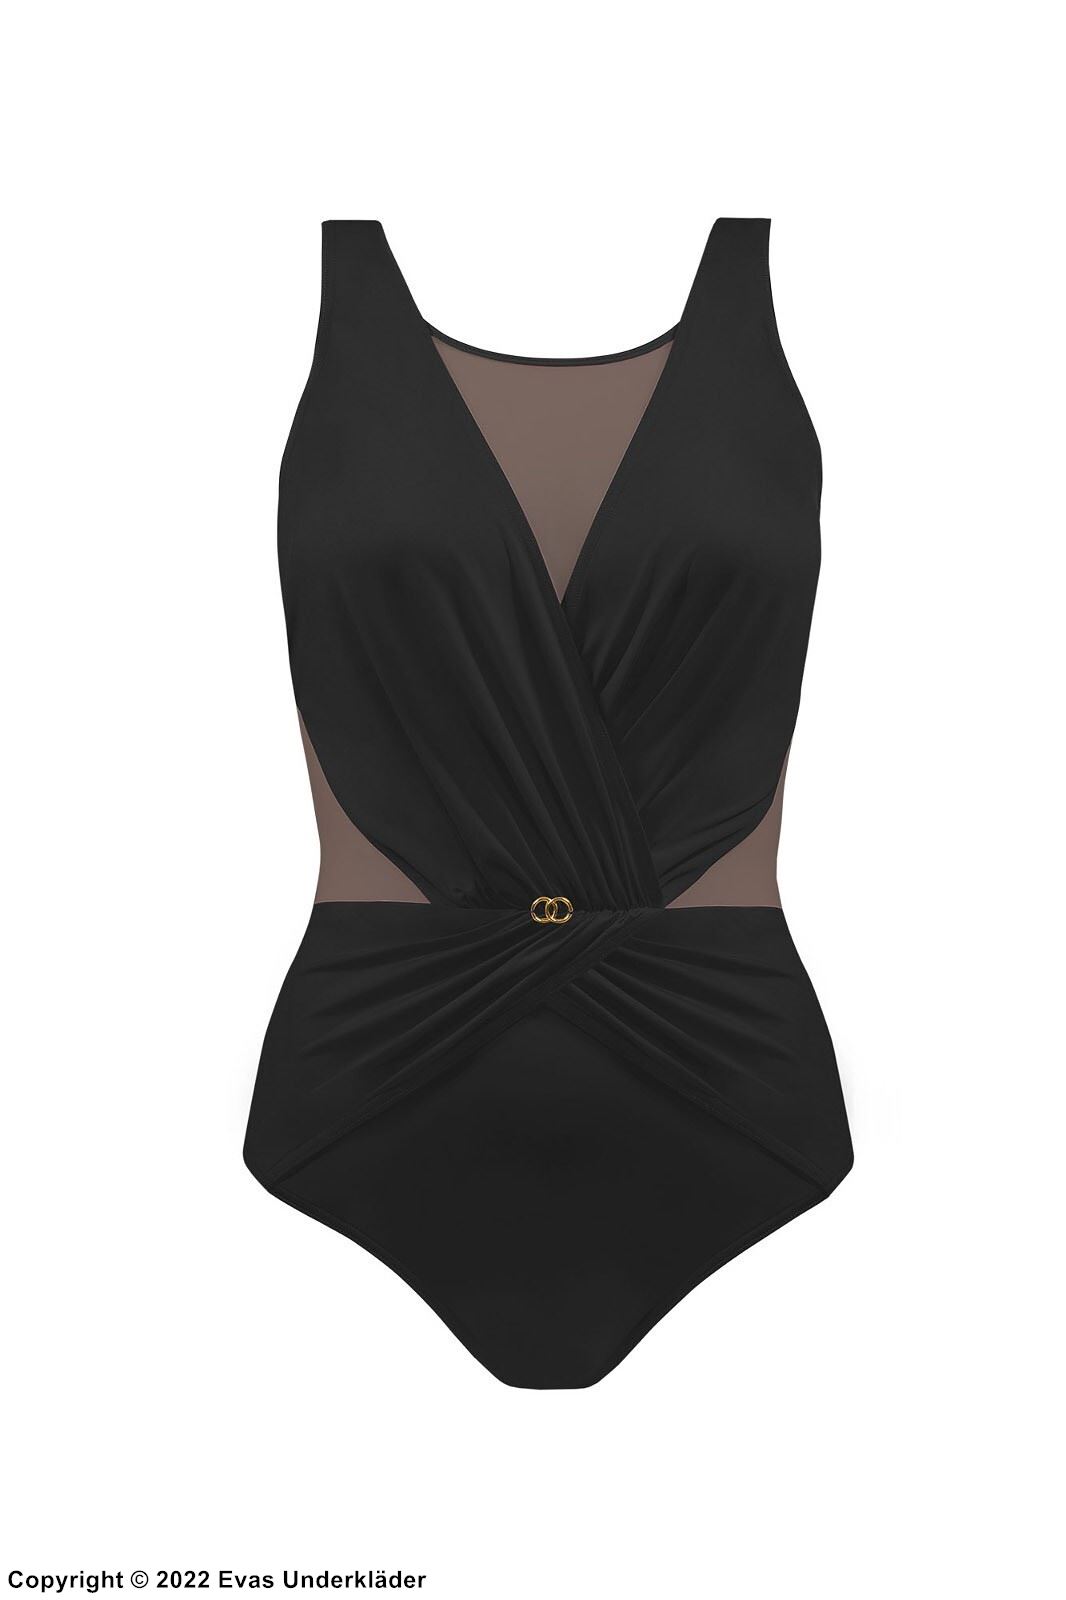 One-piece swimsuit, high quality microfiber, wide shoulder straps, mesh inlay, wrinkles